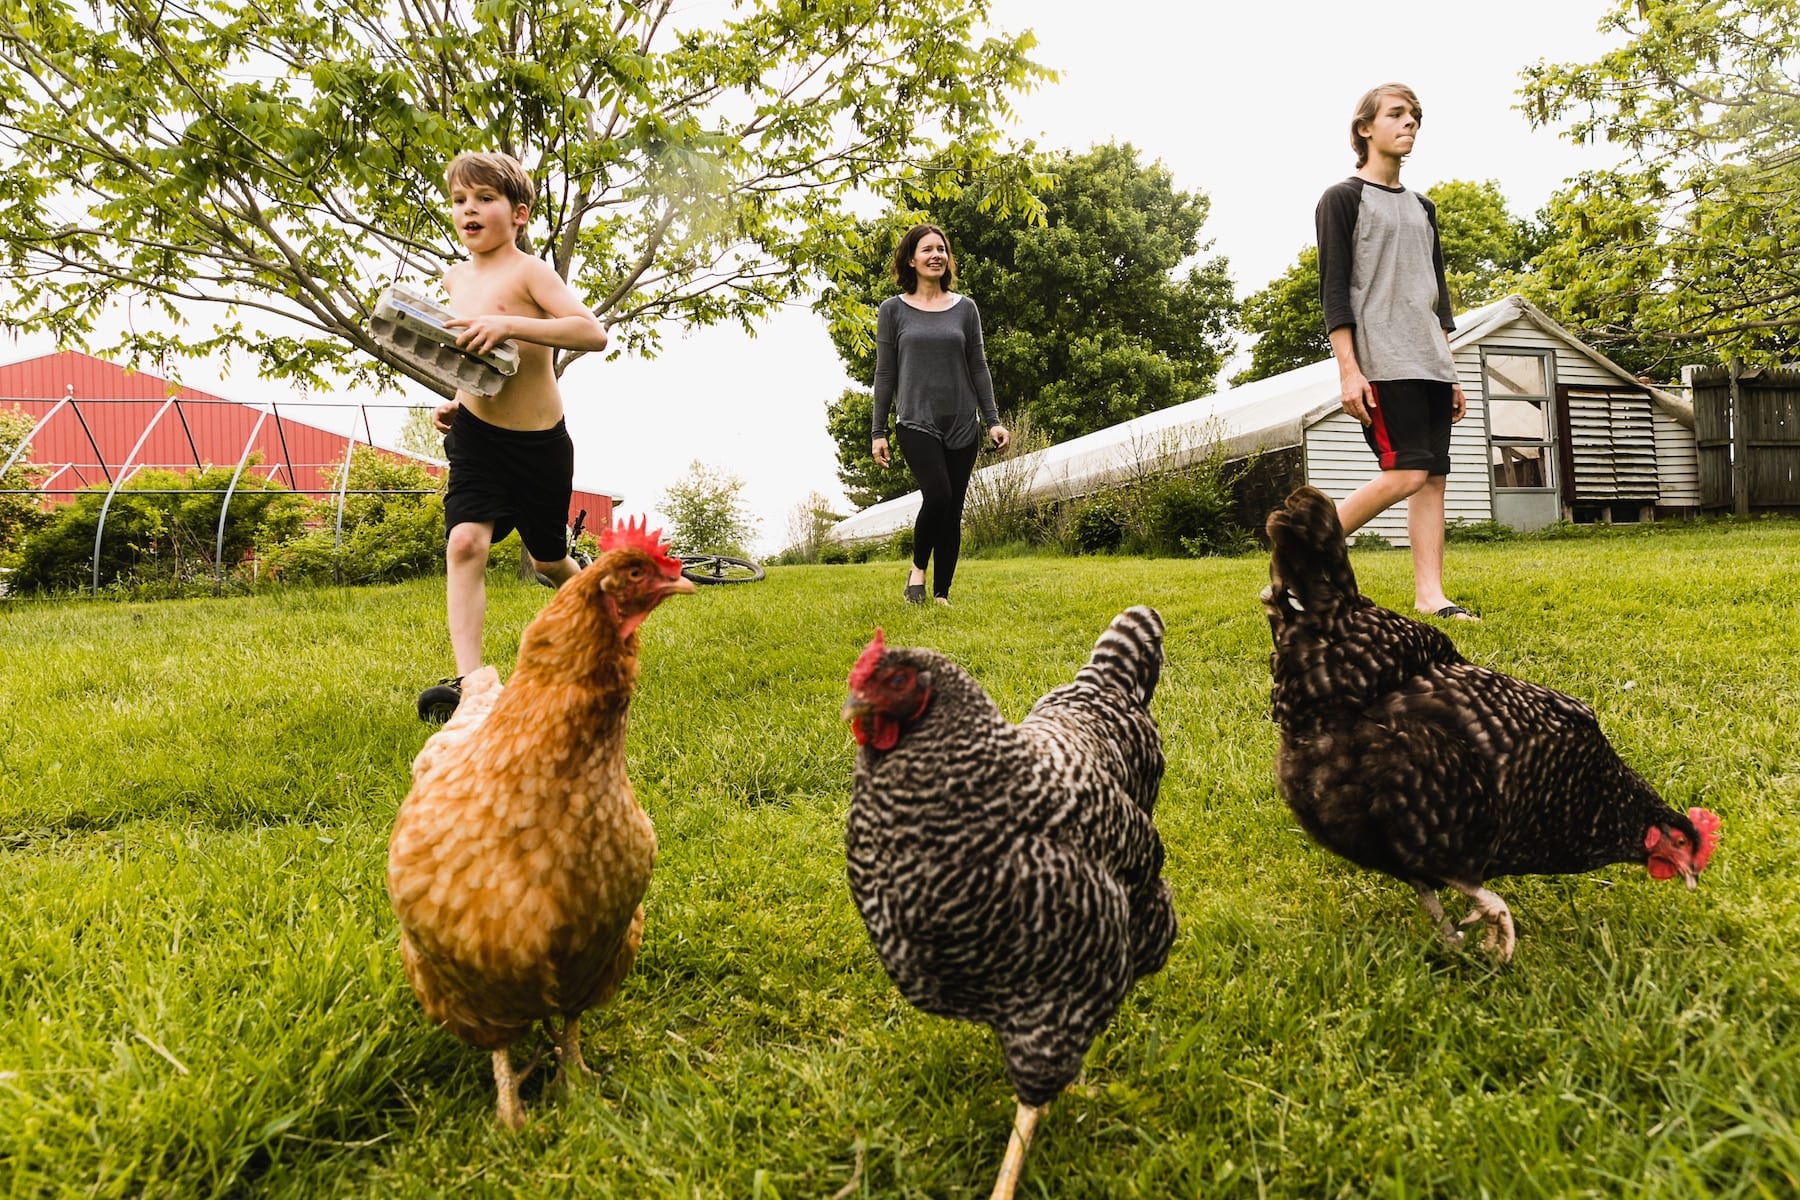 mary beth miller photographer and her 2 sons and chickens on the farm